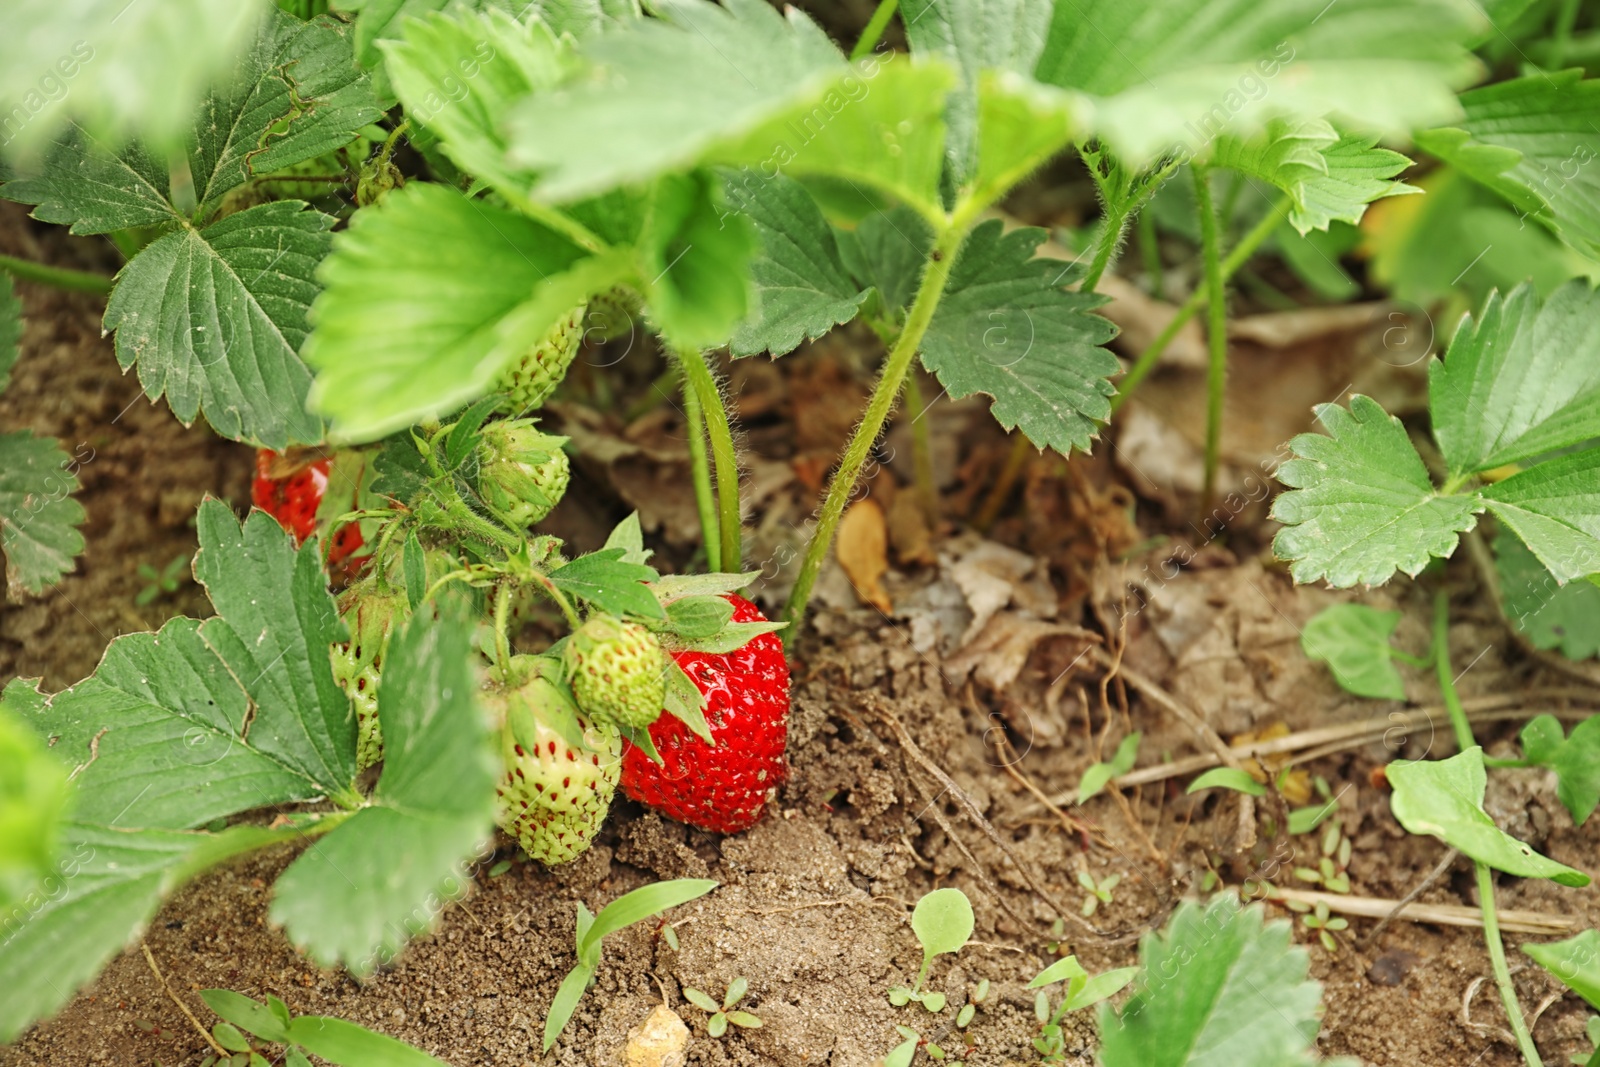 Photo of Strawberry plant with ripening berries growing in field